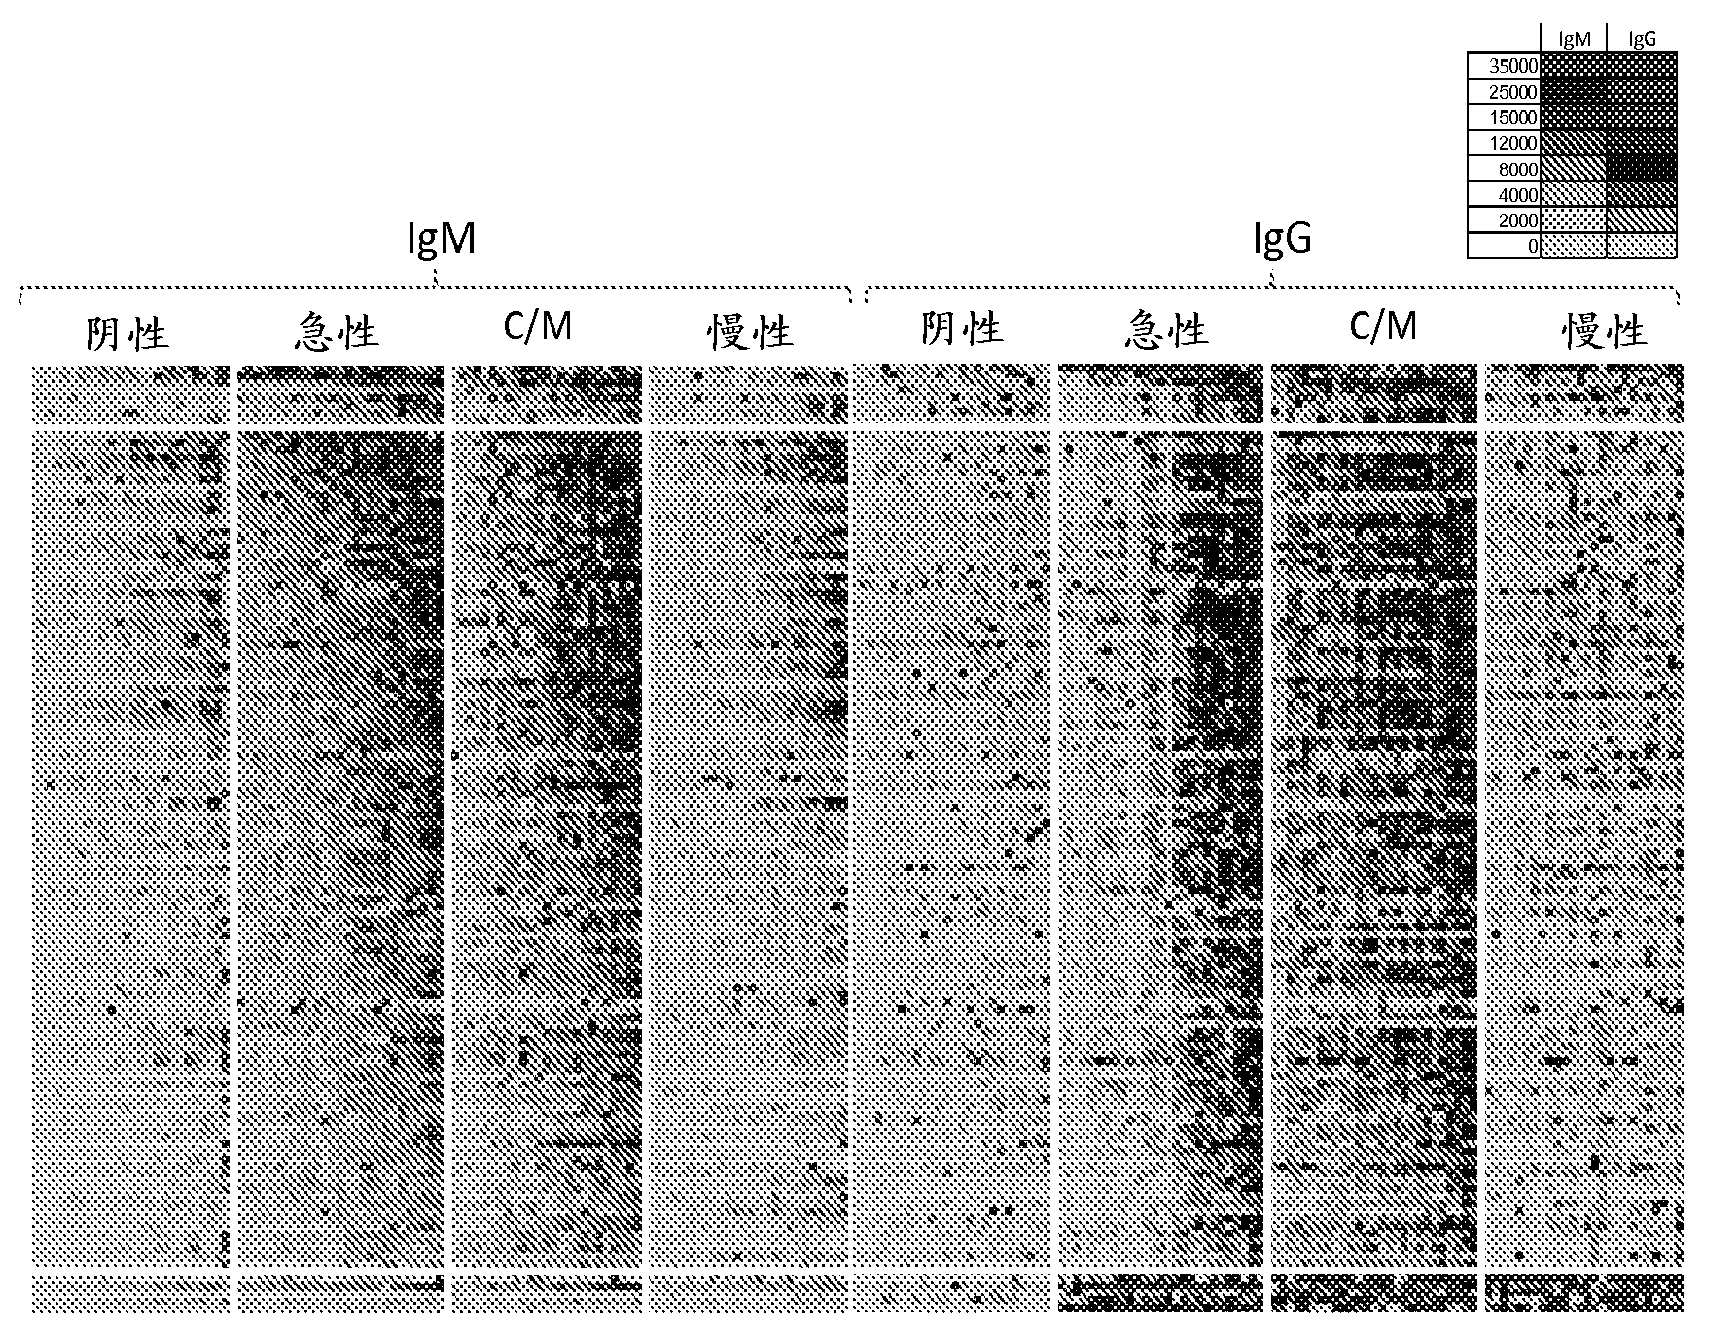 Methods and compositions of protein antigens for the diagnosis and treatment of toxoplasma gondii infections and toxoplasmosis